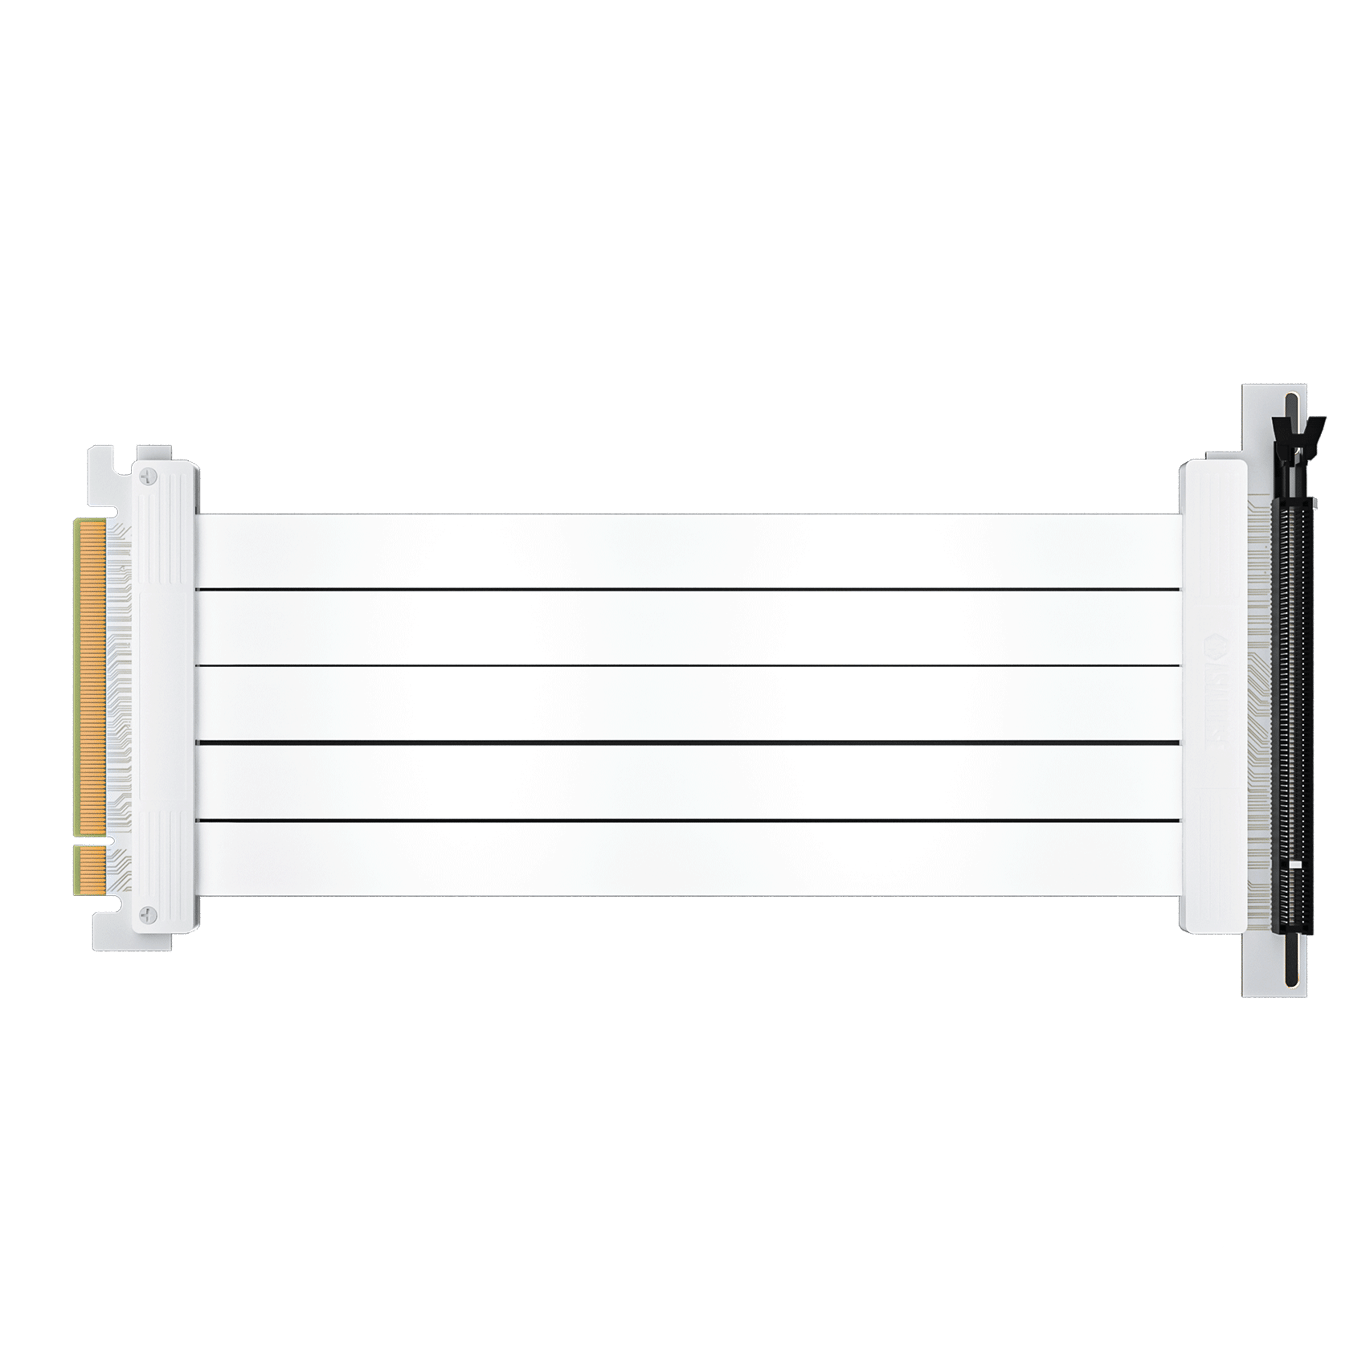 AsiaHorse PCIe 4.0 SOFT Riser Cable - White 白色